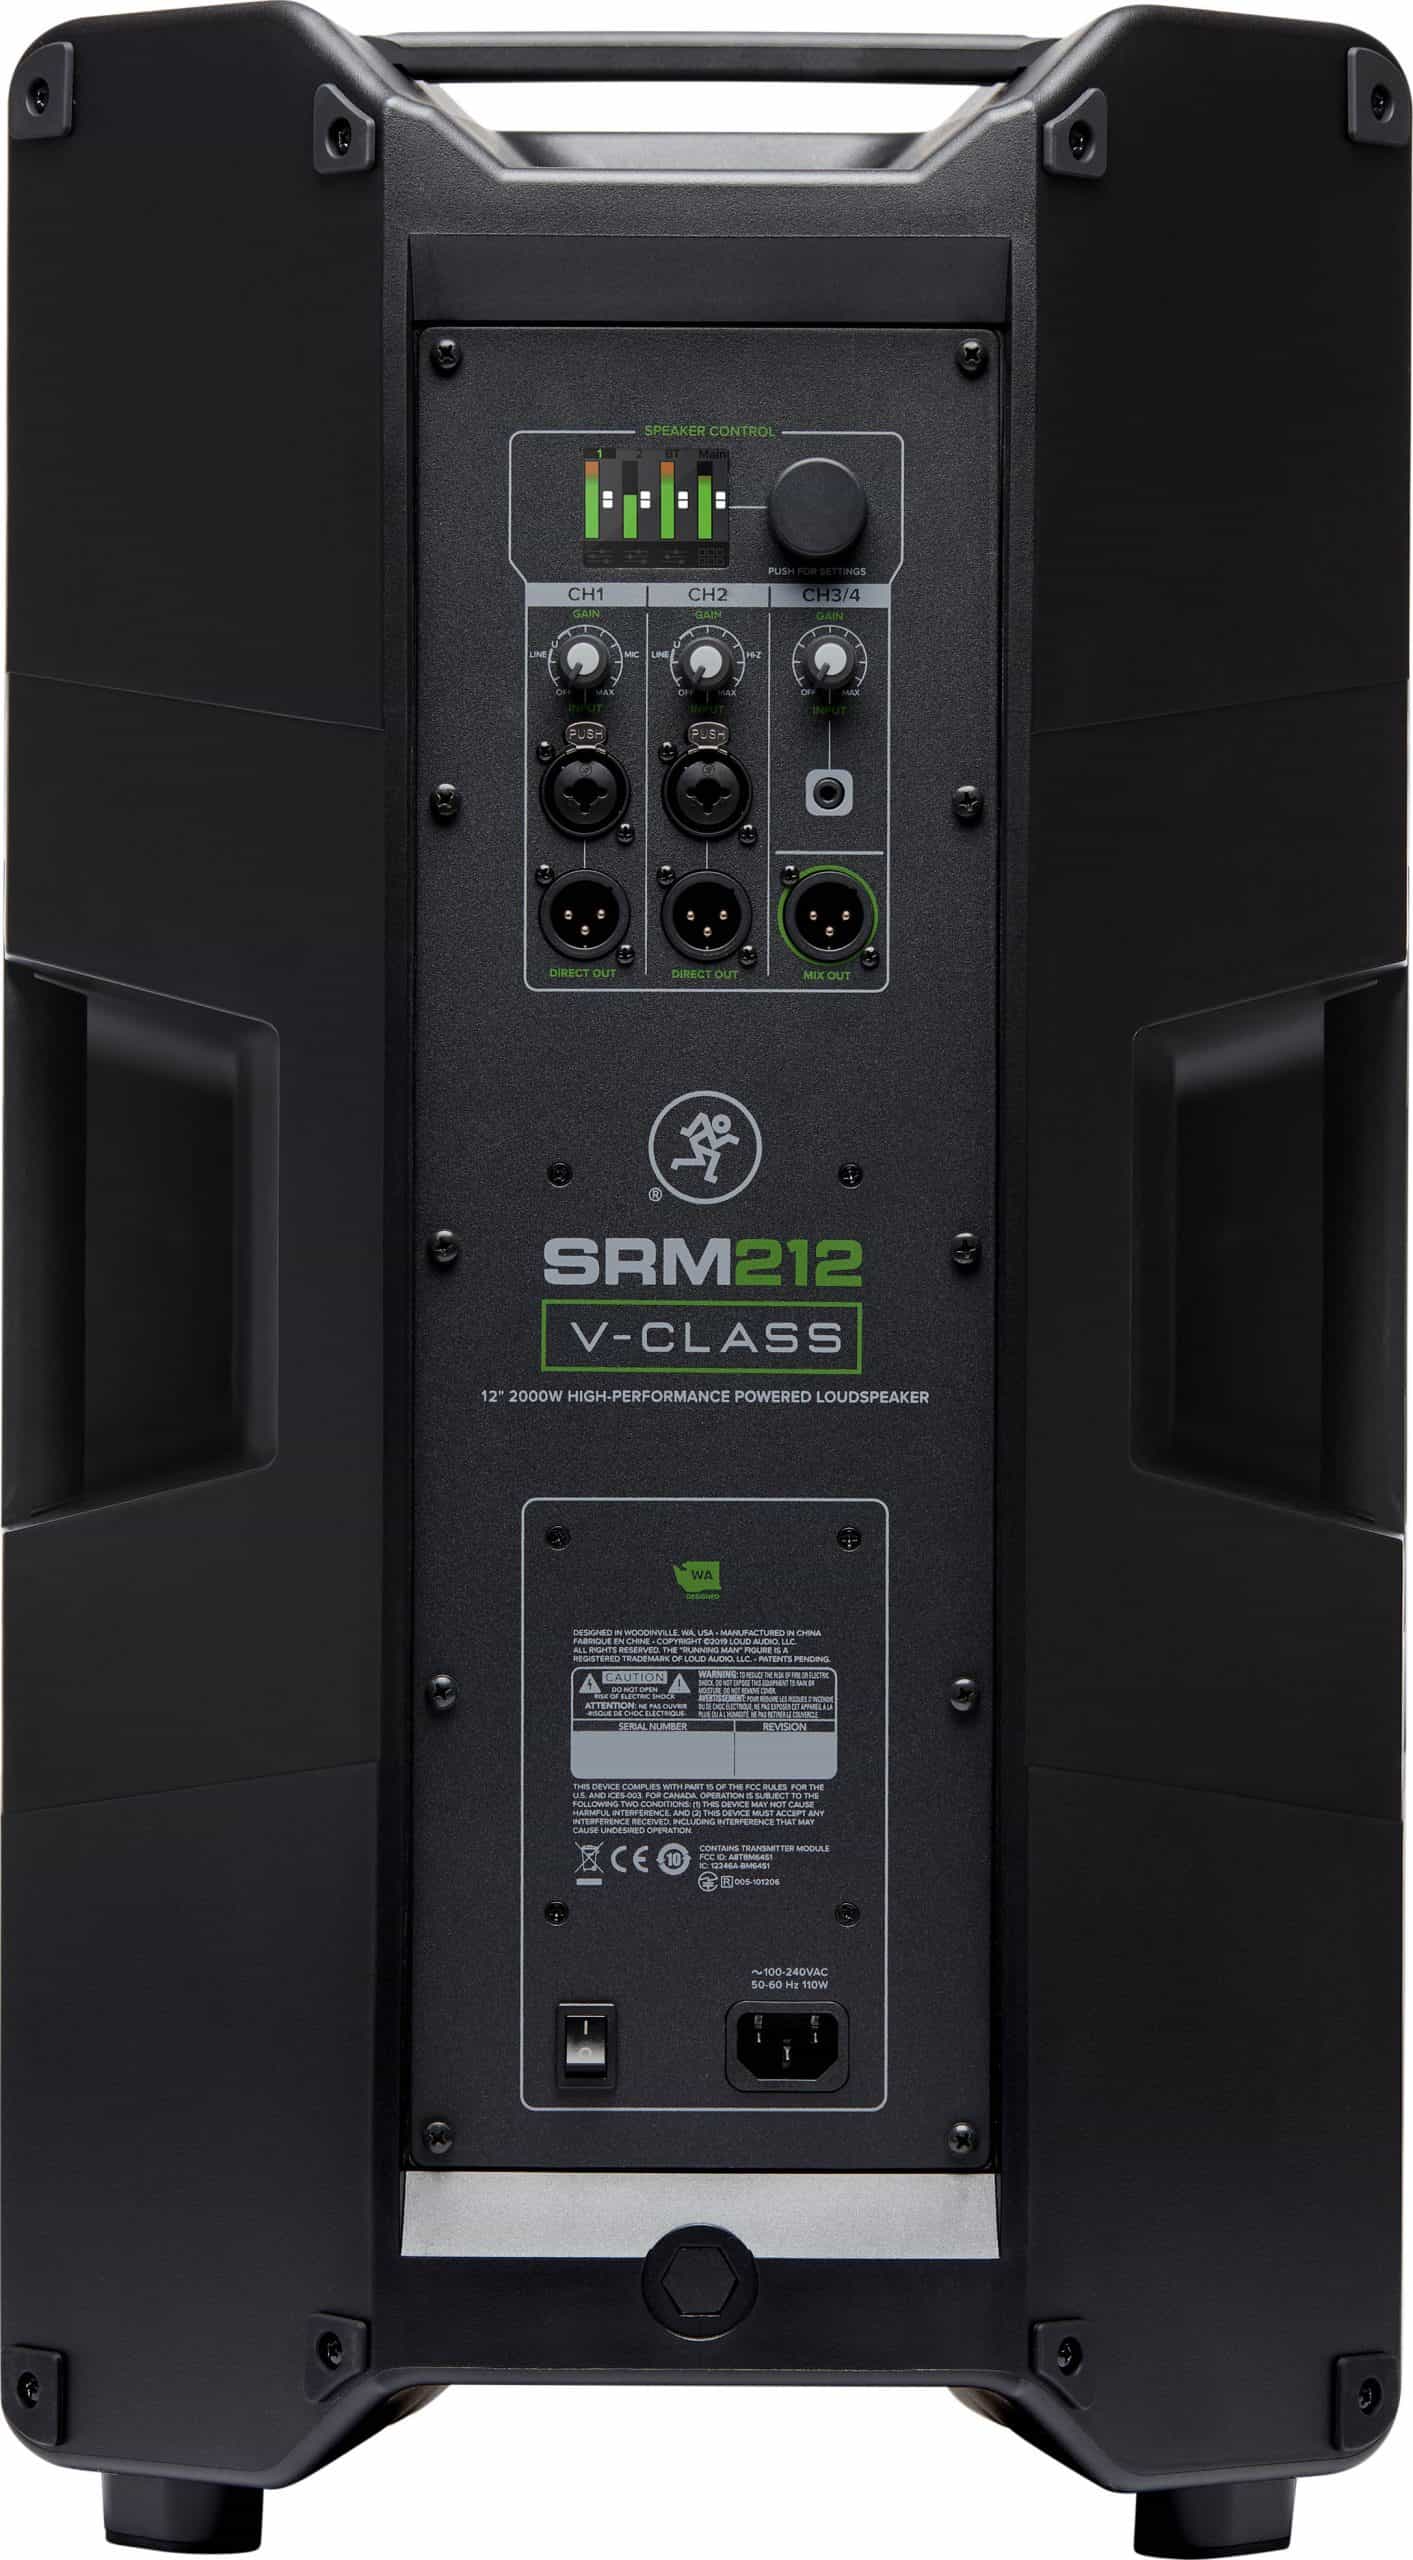 Mackie Launches Top-of-the-Line SRM V-Class Professional Loudspeakers